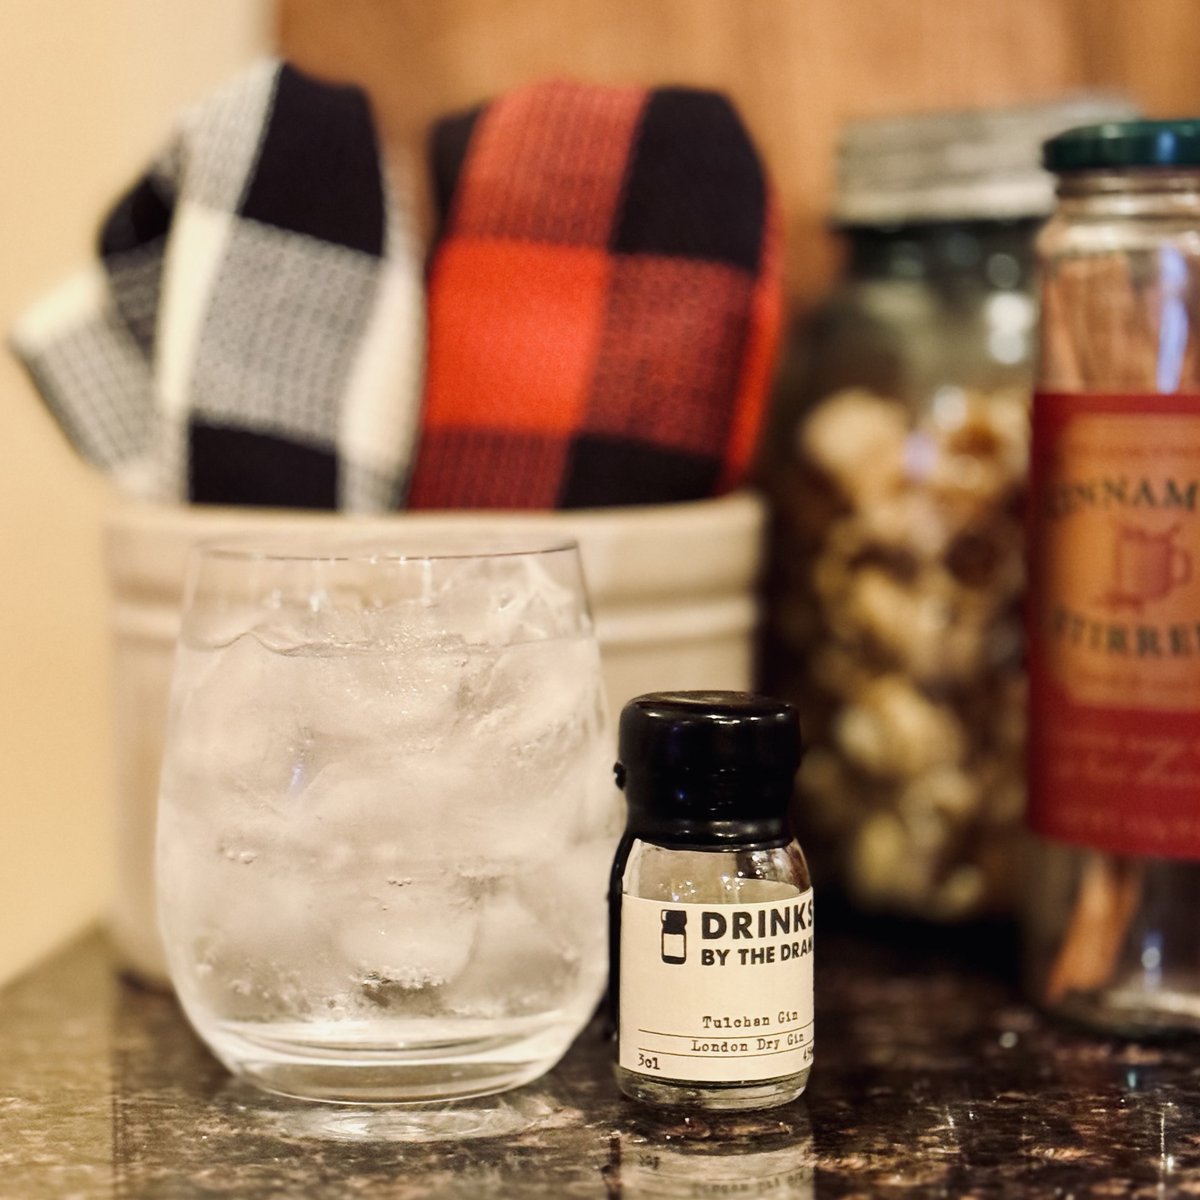 @SuntoryGlobal @Kyrodistillery @FeverTreeMixers @No3Gin @Edinburgh_Gin Day 22 of #ginvent: Tulchan Gin by the Tulchan Distillery

A Scottish London Dry with a decent flavor and botanicals. Enjoyed the flavor, especially some of the fruit that came through nicely after the initial juniper. #cheers